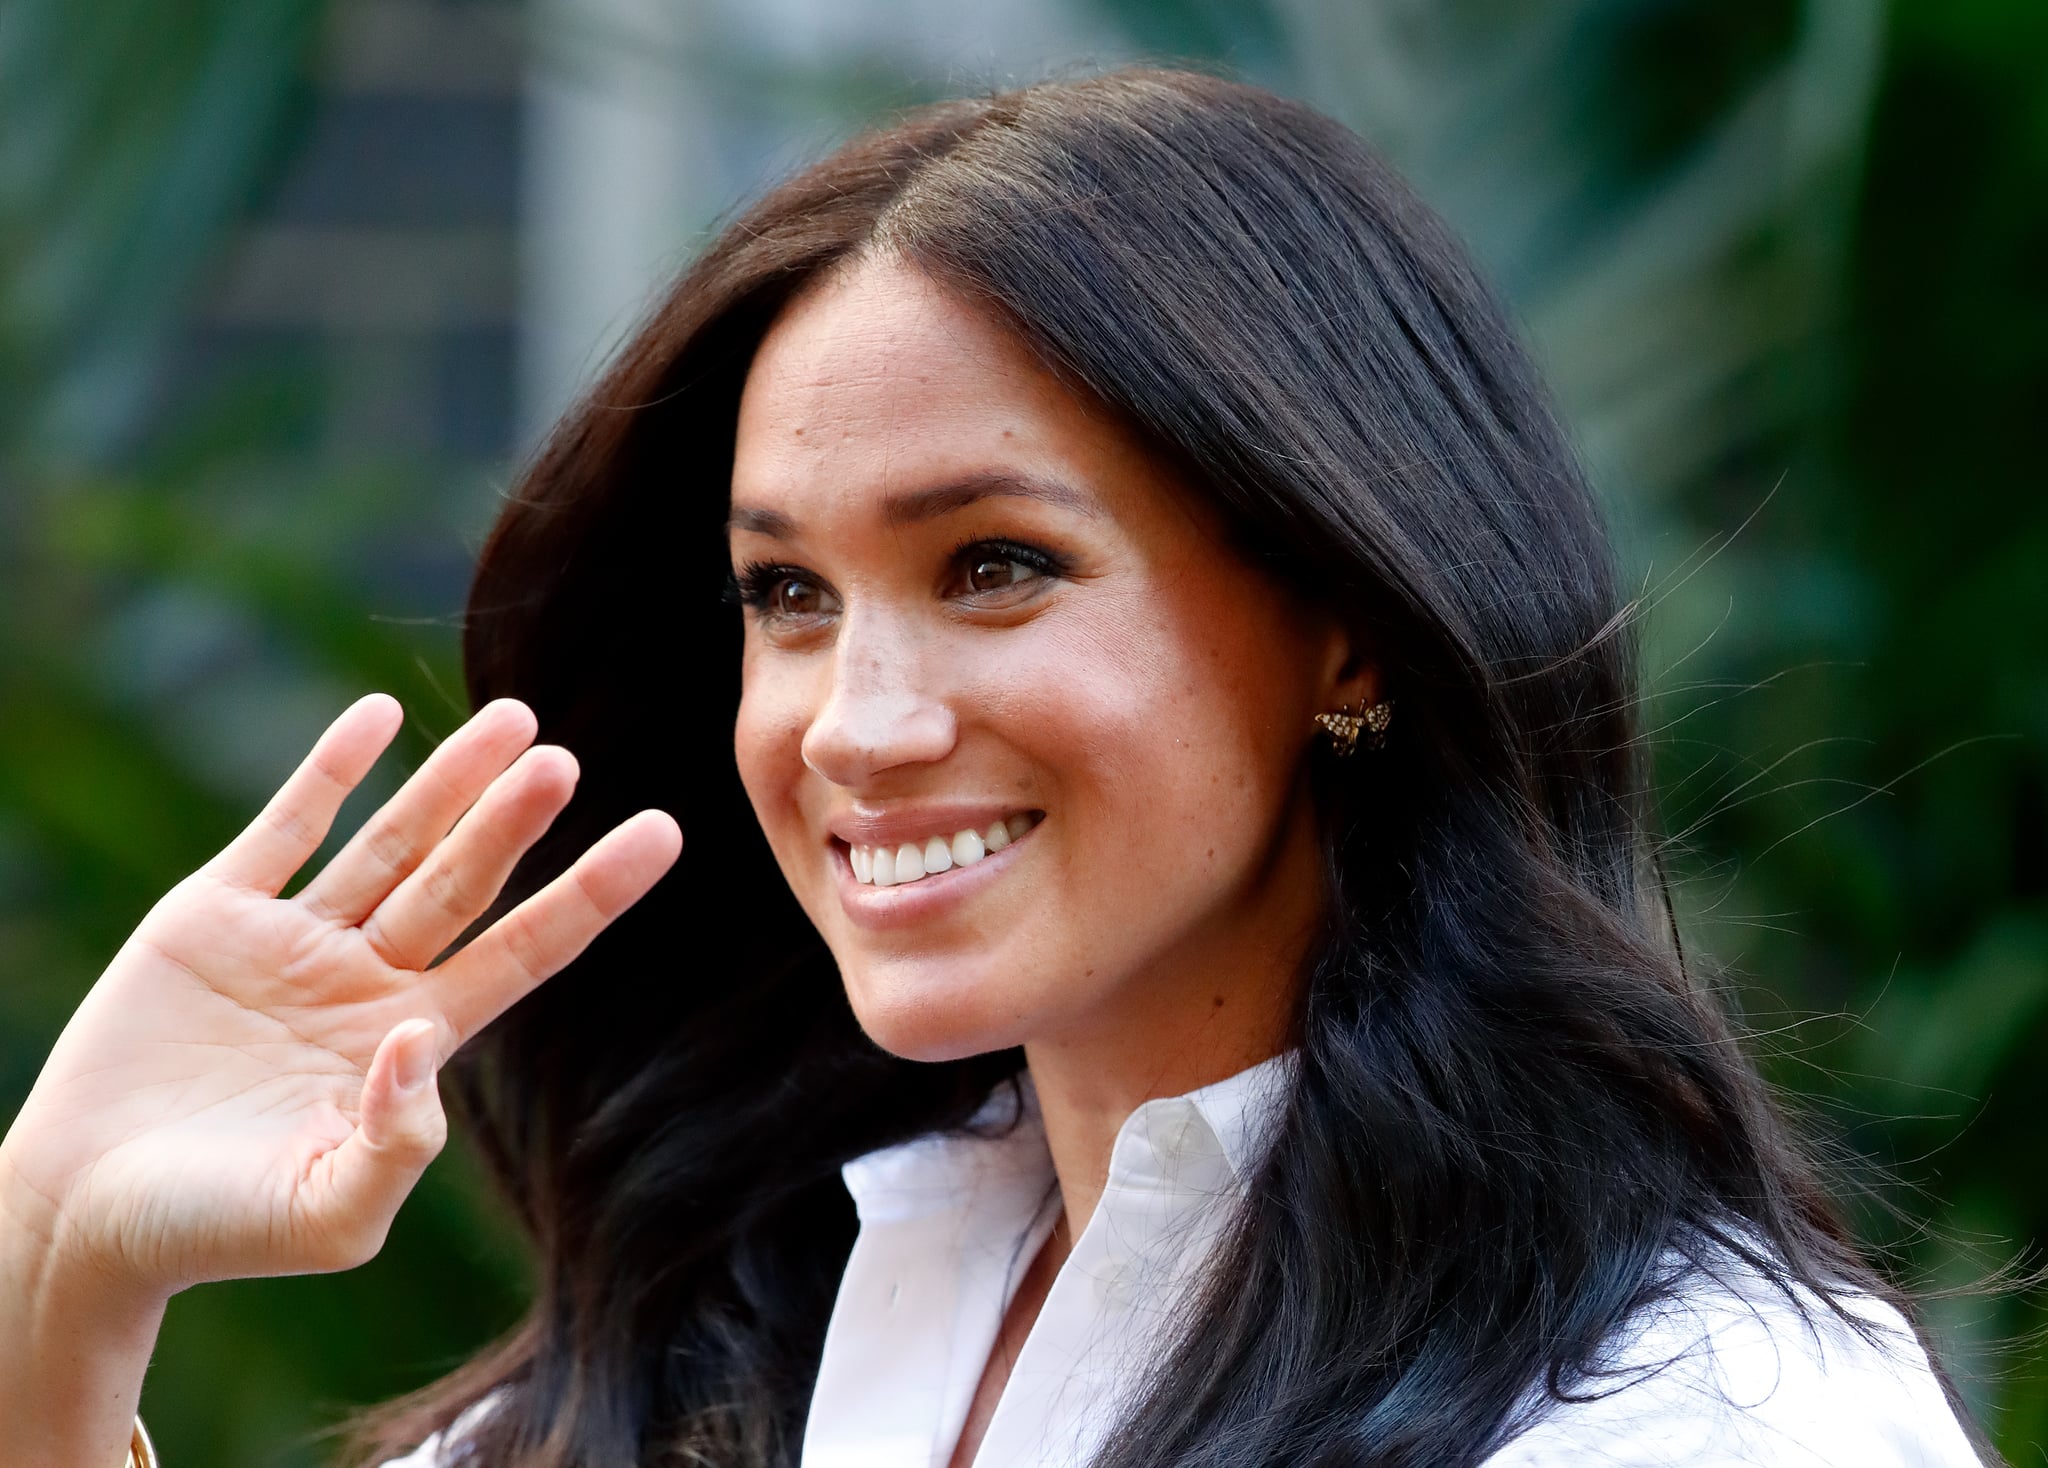 LONDON, UNITED KINGDOM - SEPTEMBER 12: (EMBARGOED FOR PUBLICATION IN UK NEWSPAPERS UNTIL 24 HOURS AFTER CREATE DATE AND TIME) Meghan, Duchess of Sussex launches the Smart Works capsule collection on September 12, 2019 in London, England. Created in September 2013 Smart Works exists to help unemployed women regain the confidence they need to succeed at job interviews and return to employment. (Photo by Max Mumby/Indigo/Getty Images)